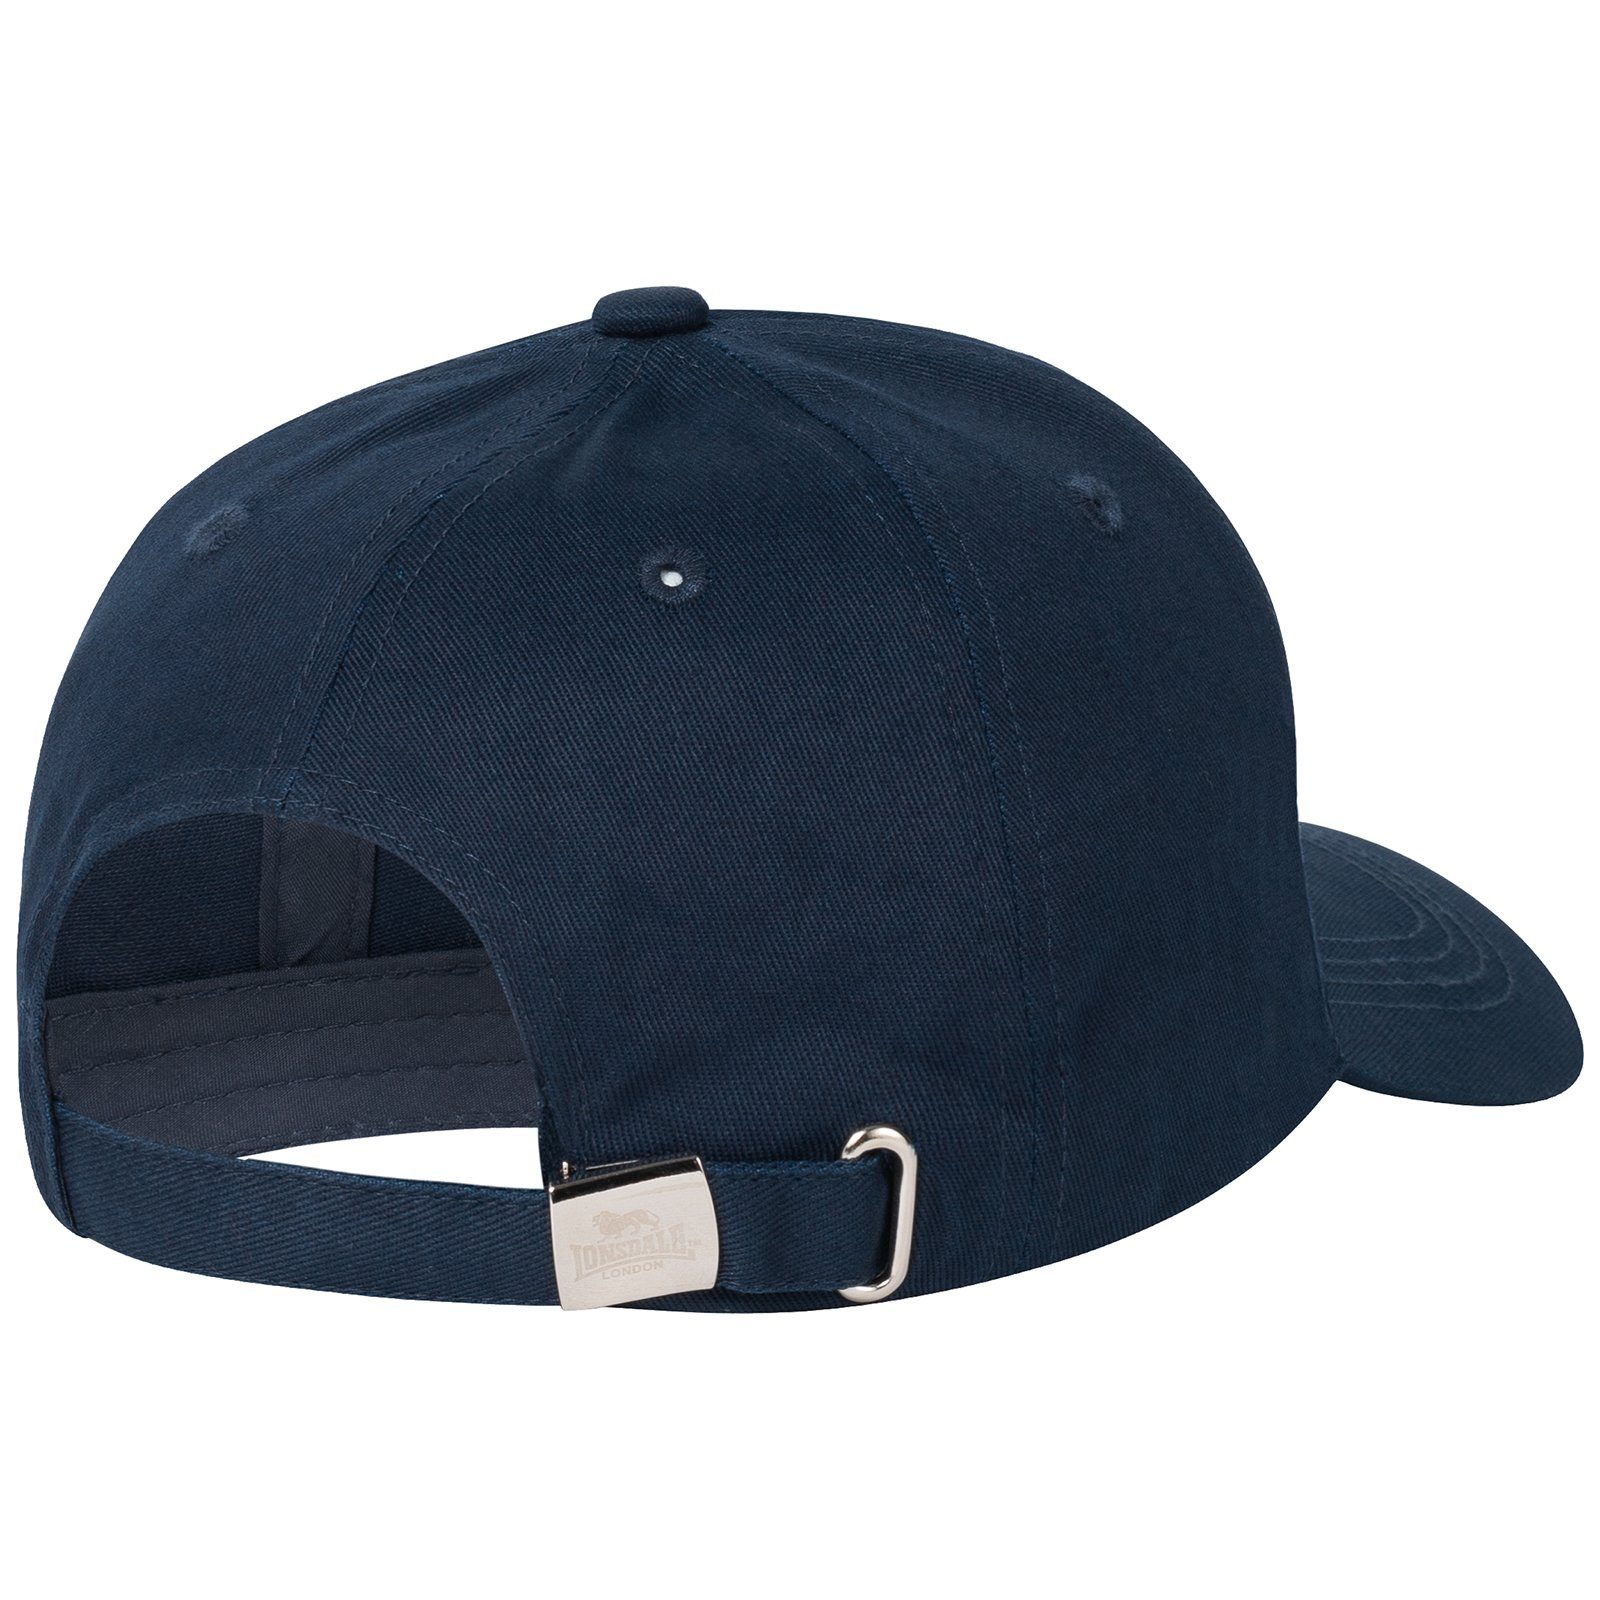 Baseball Cap Lonsdale WILTSHIRE